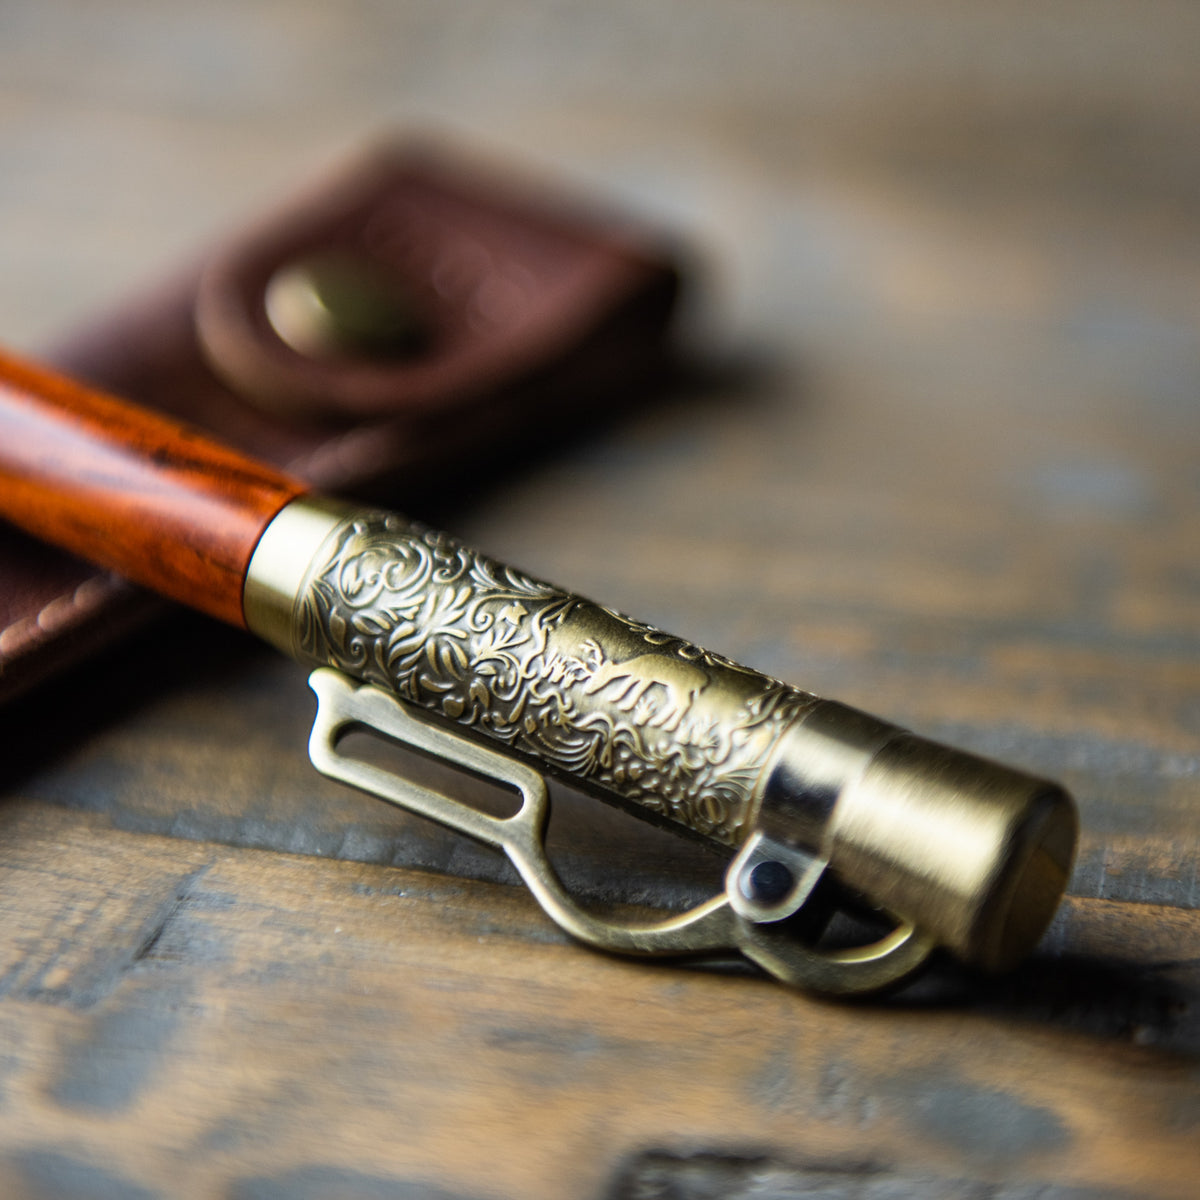 The Cowboy Lever Action Hand Turned Rose Wood Pen + Pen Sleeve